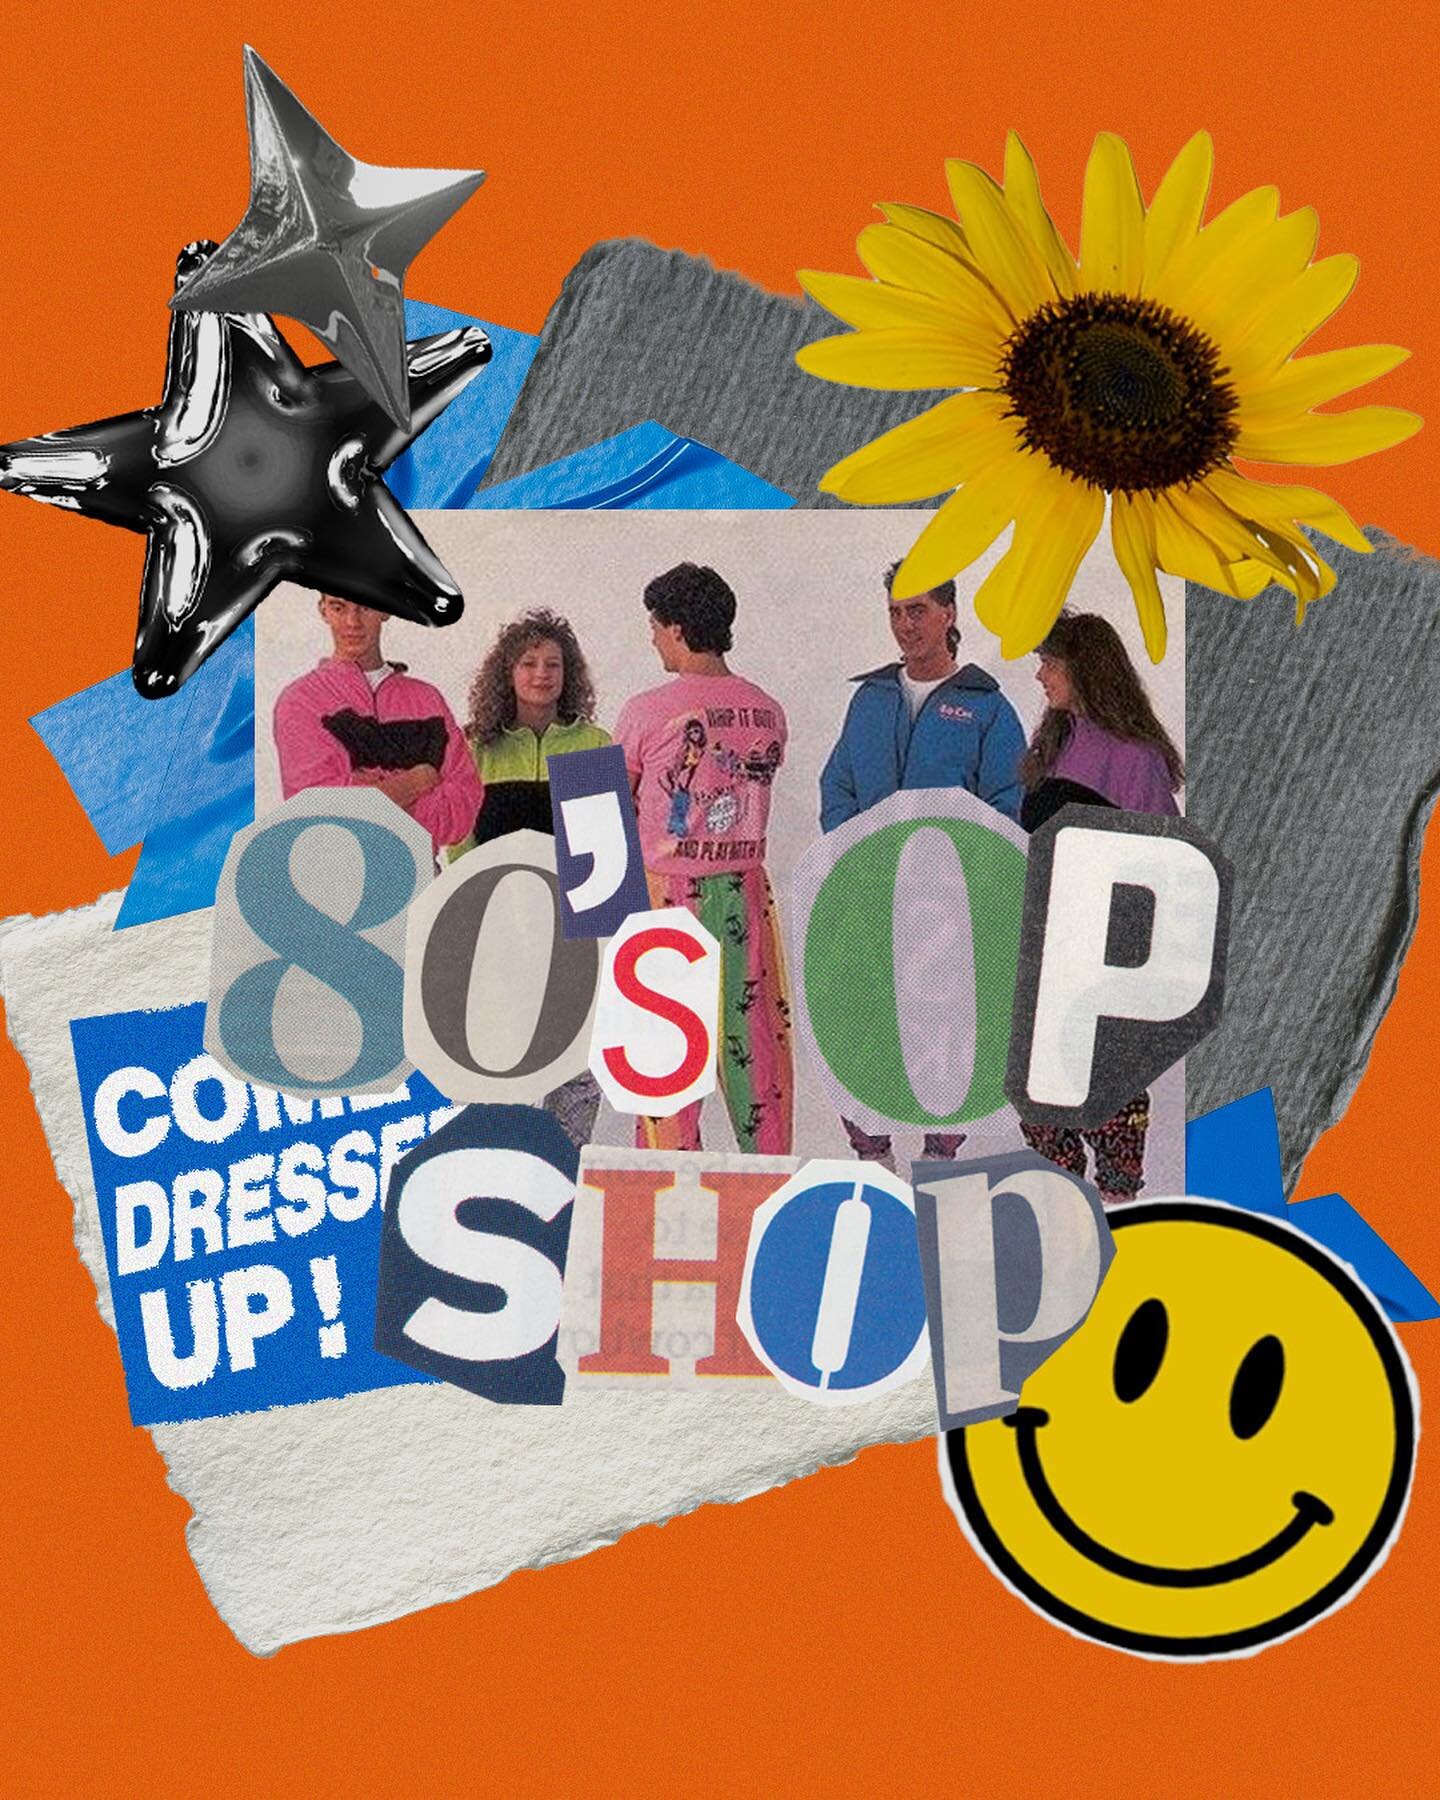 THIS WEEK IS 80&rsquo;s OP SHOP NIGHT‼️‼️

Coke dressed up in a 80&rsquo;s themed outfit we got an amazing night planned for y&rsquo;all 🕺🏿 

6:30 pm at the Training Centre 2 Glenmore Rd 

Don&rsquo;t forget to bring a friend see you soon 🔥🔥